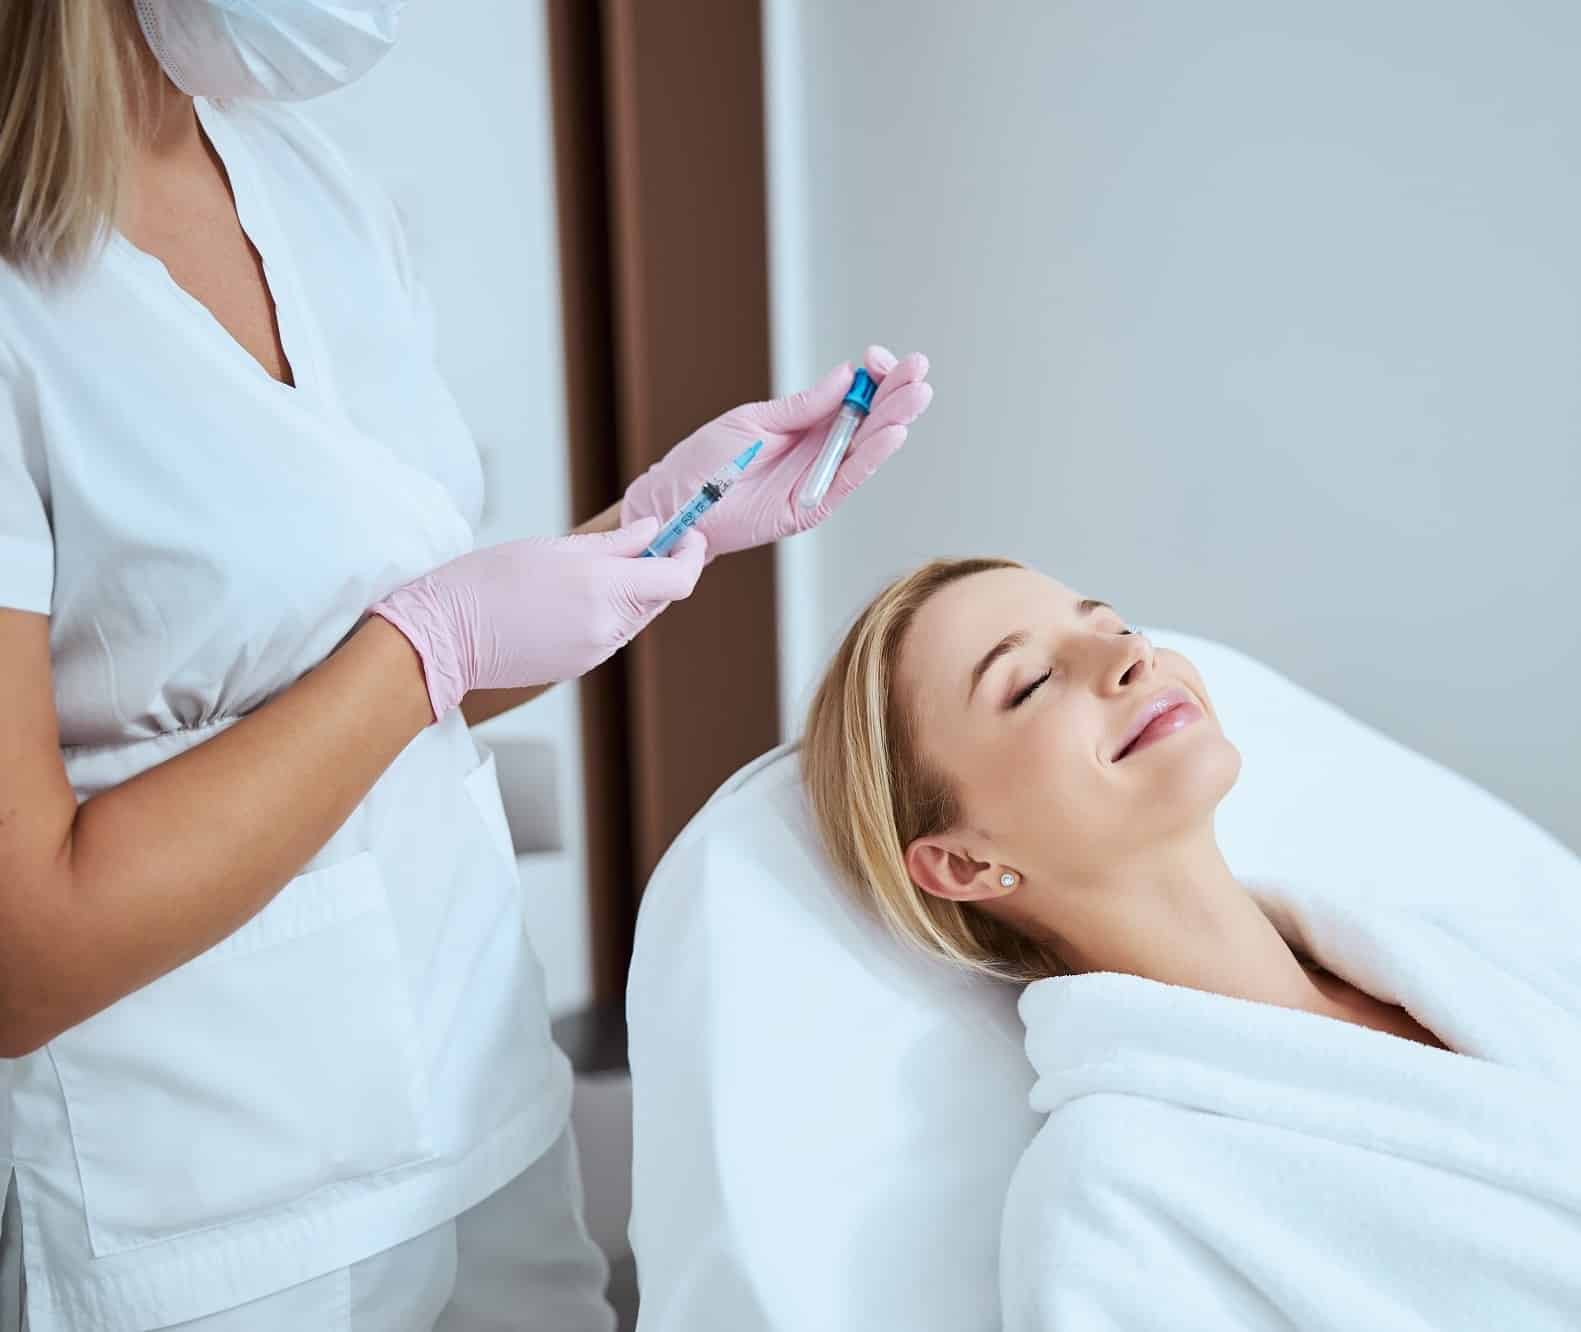 A patient ready to receive PRP facial treatment at the Skin Emporium clinic in Clapham, London.